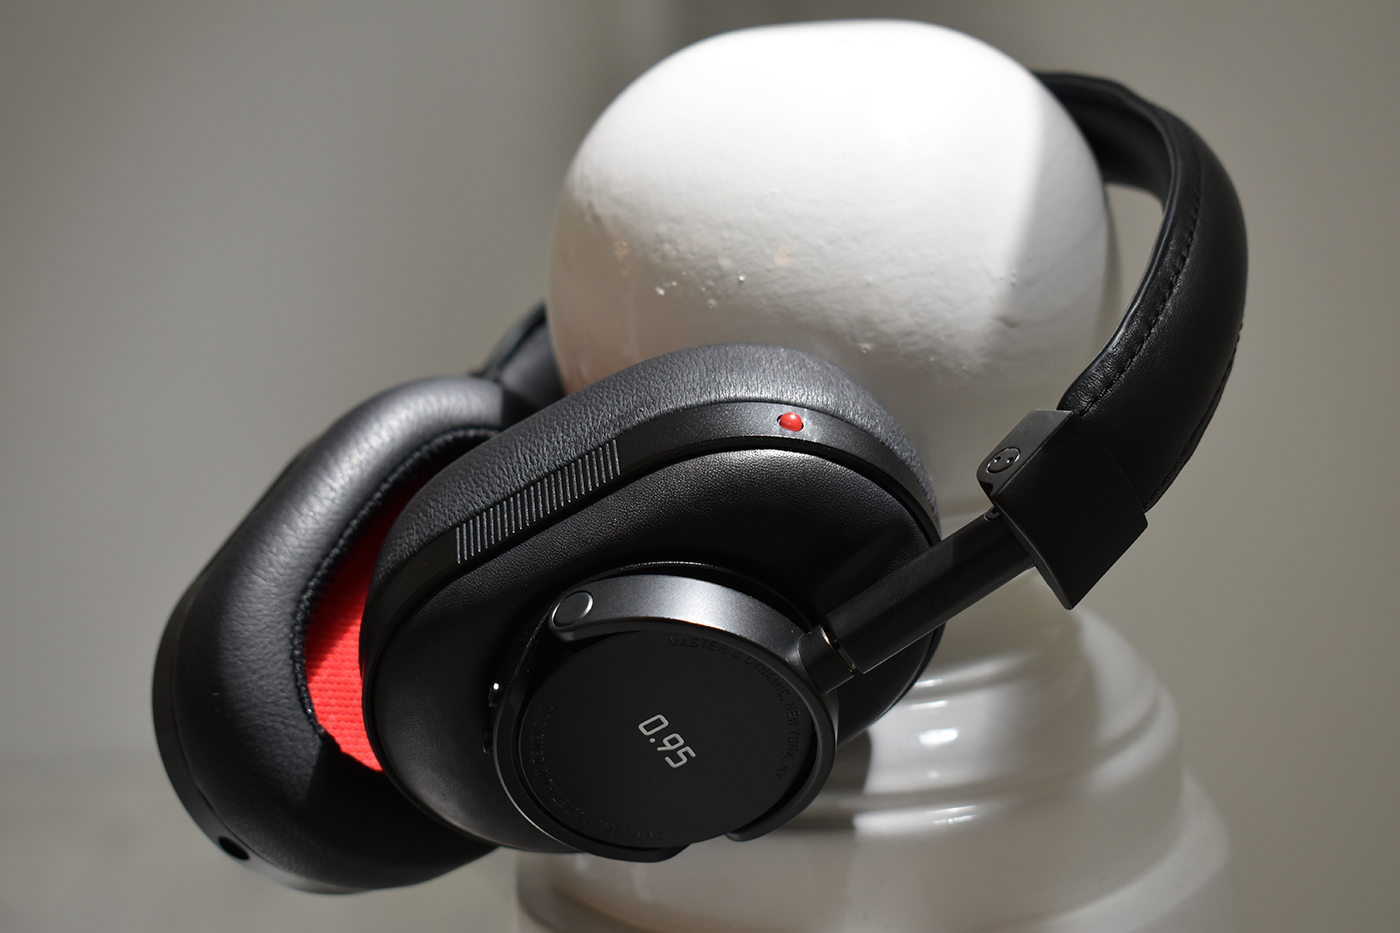 The Master & Dynamic MW60 x Leica headphone collab is all about 